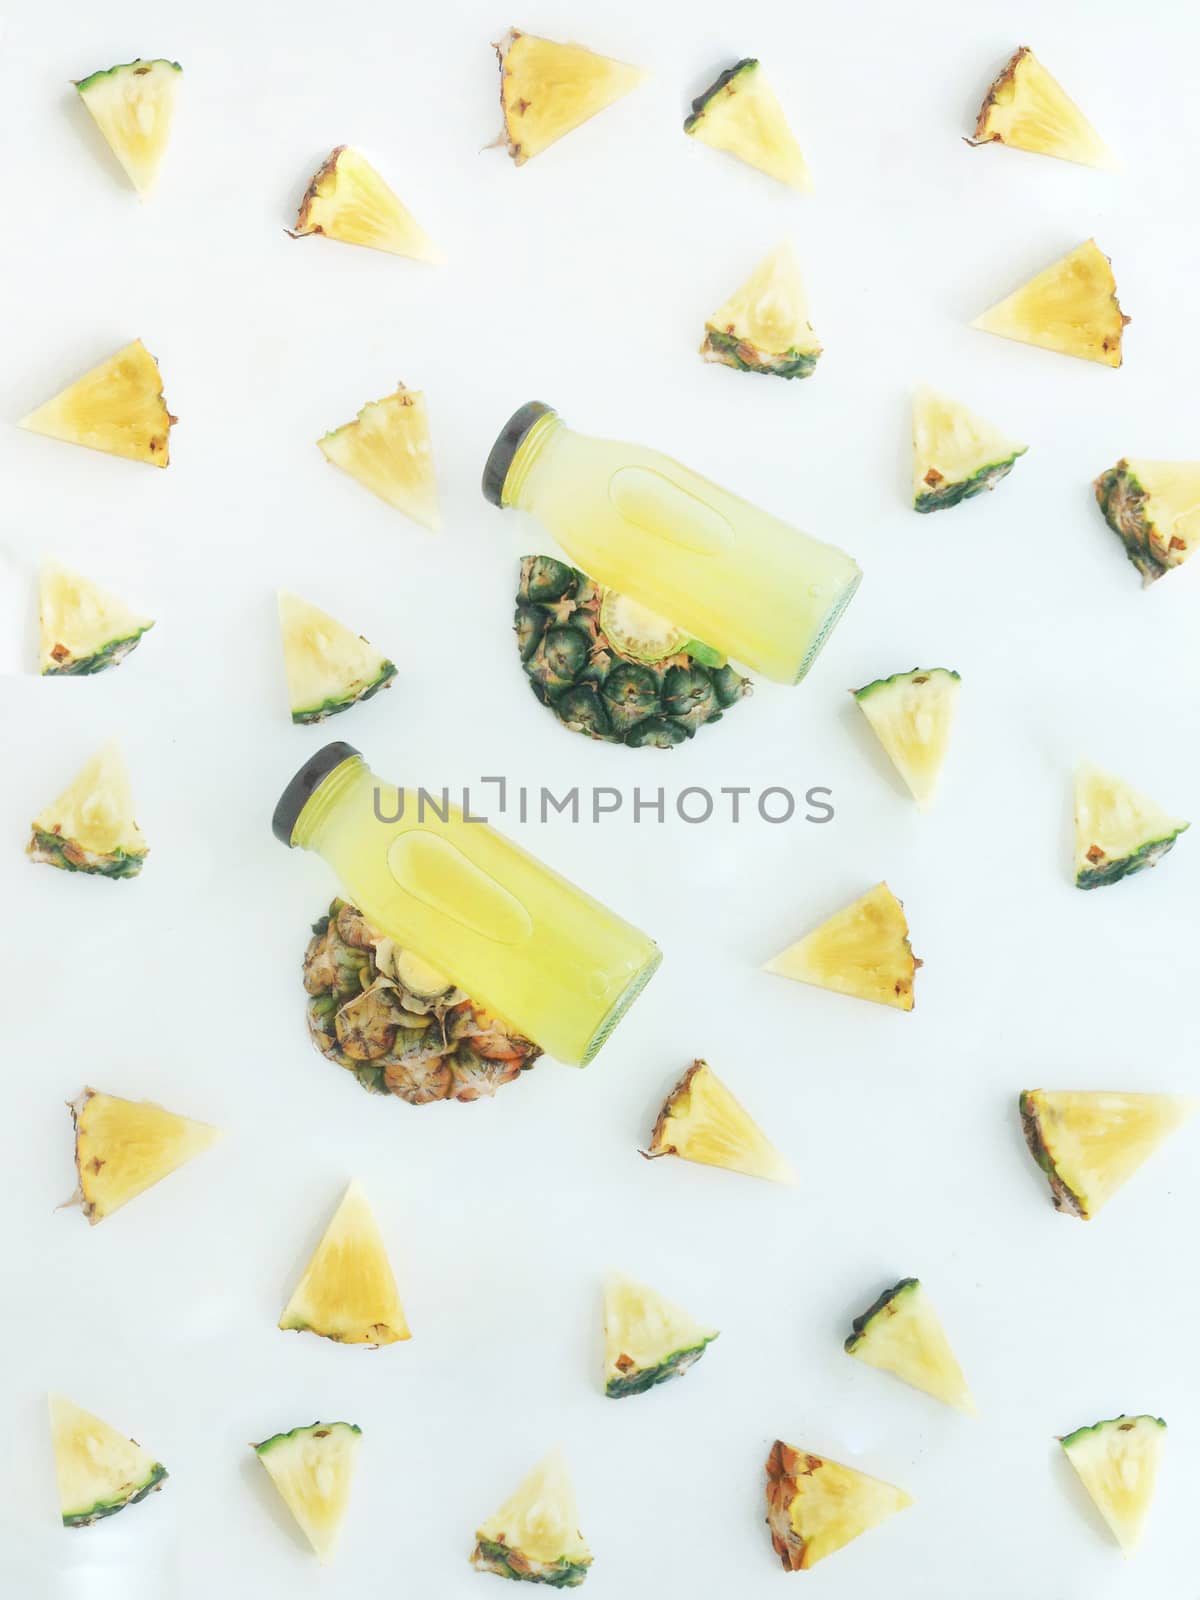 Fresh and cold pineapple drink among triangular piece of pineapp by Bowonpat